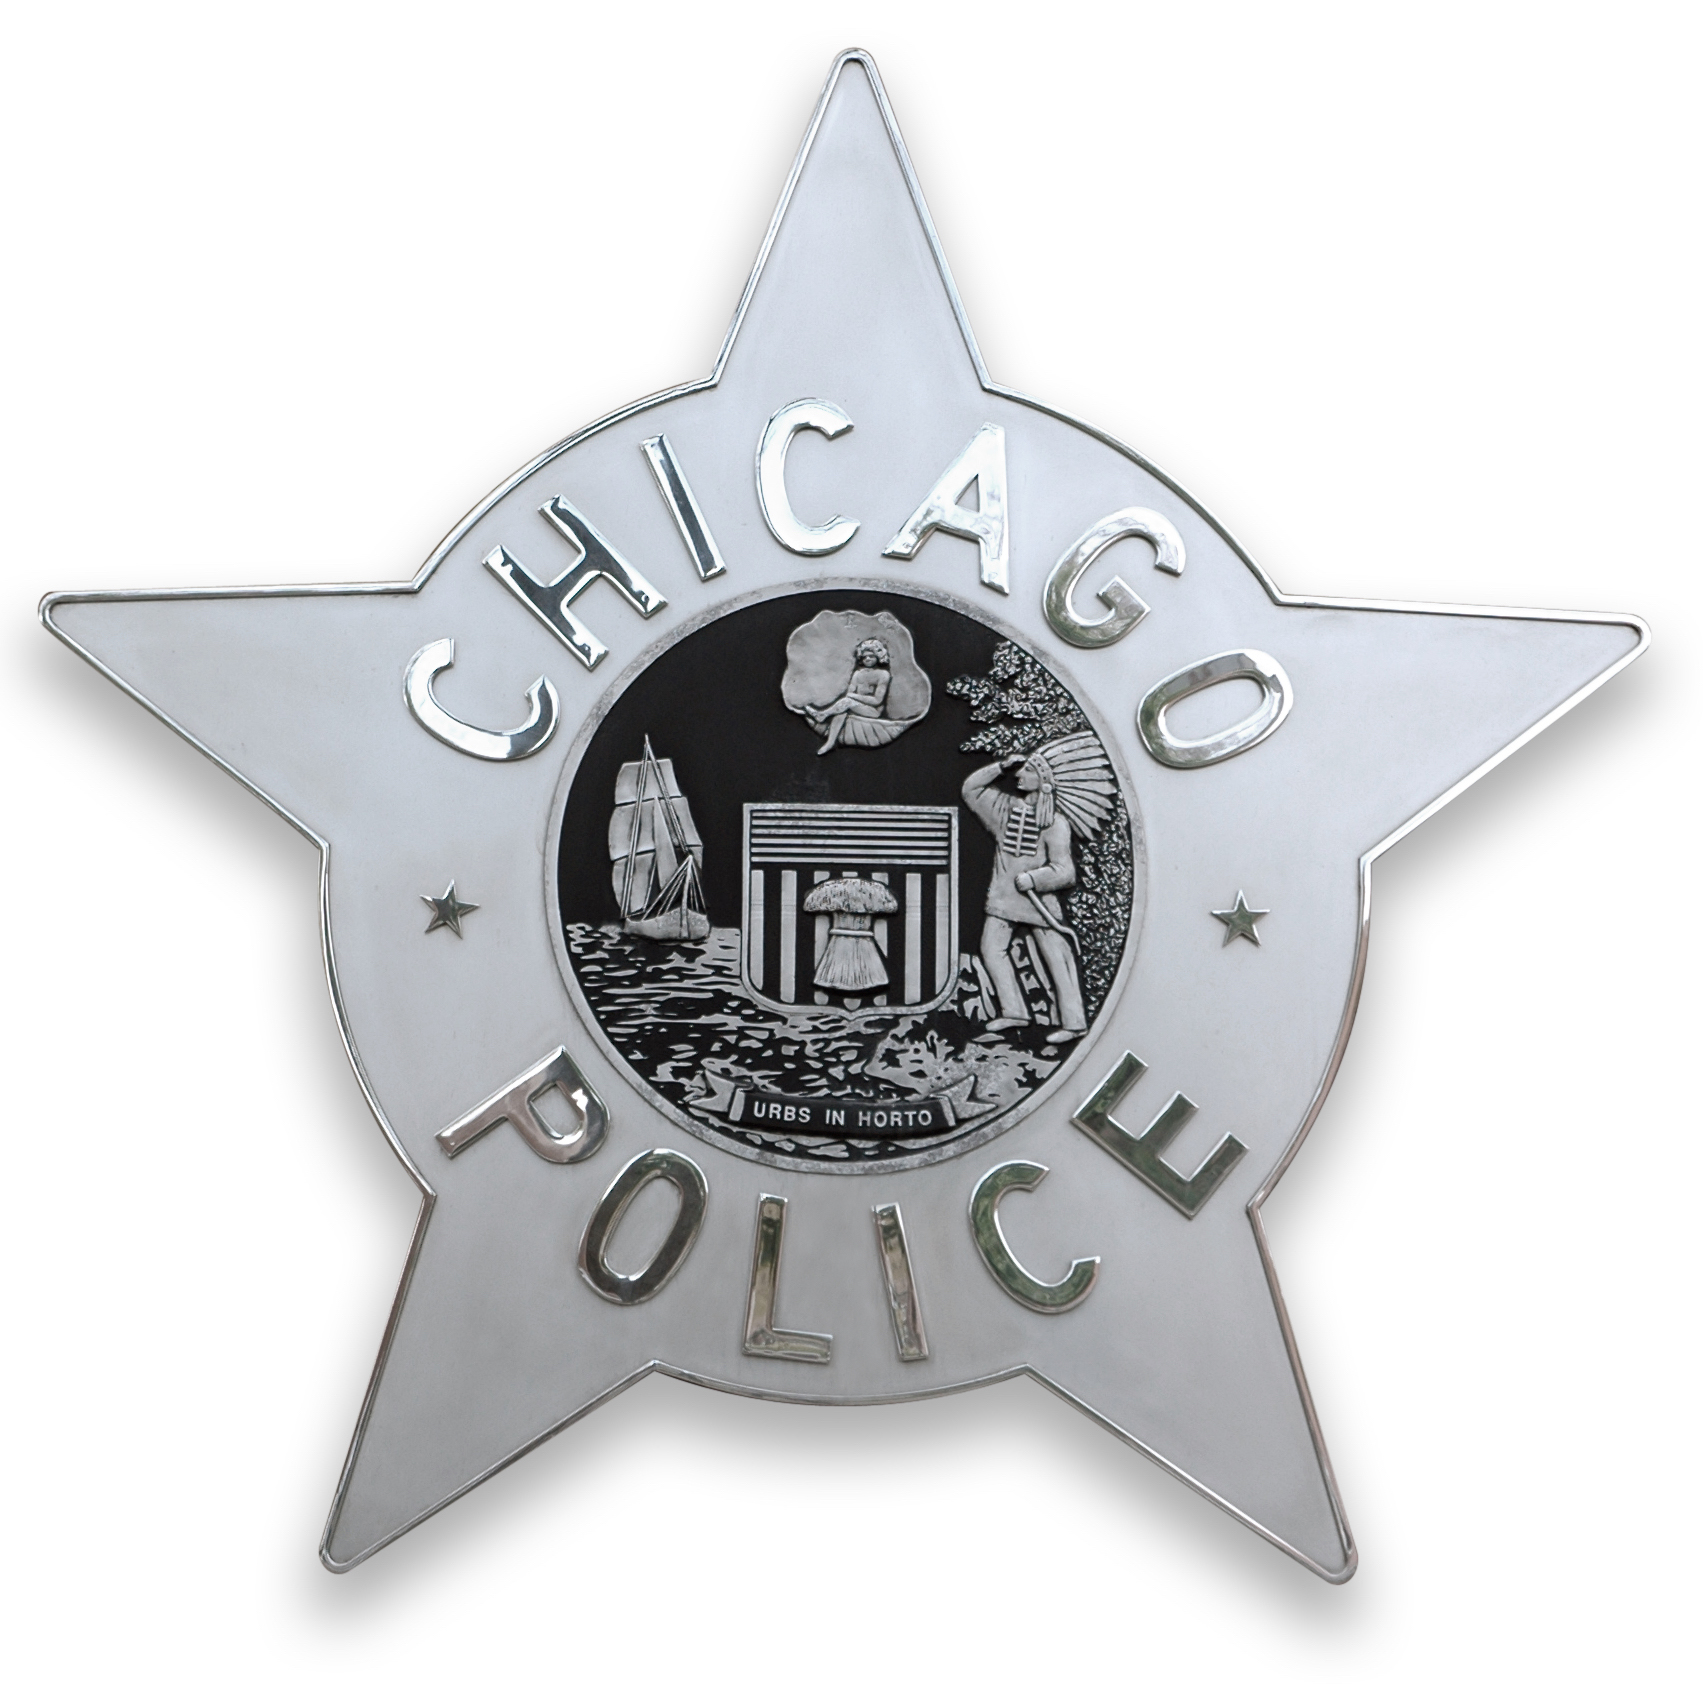 The Chicago Police Department